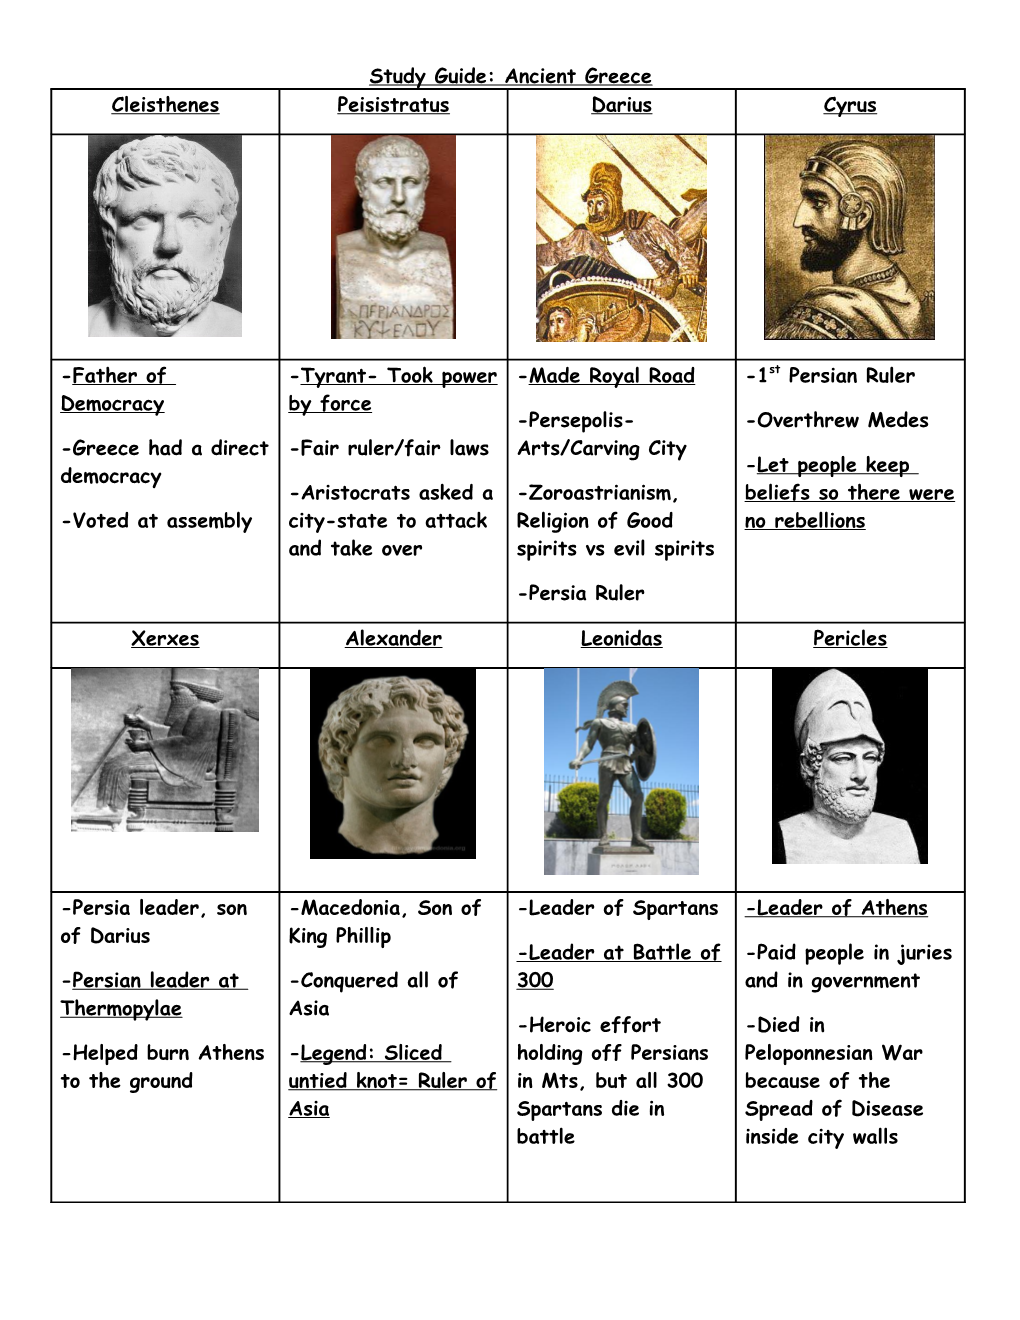 Study Guide: Ancient Greece